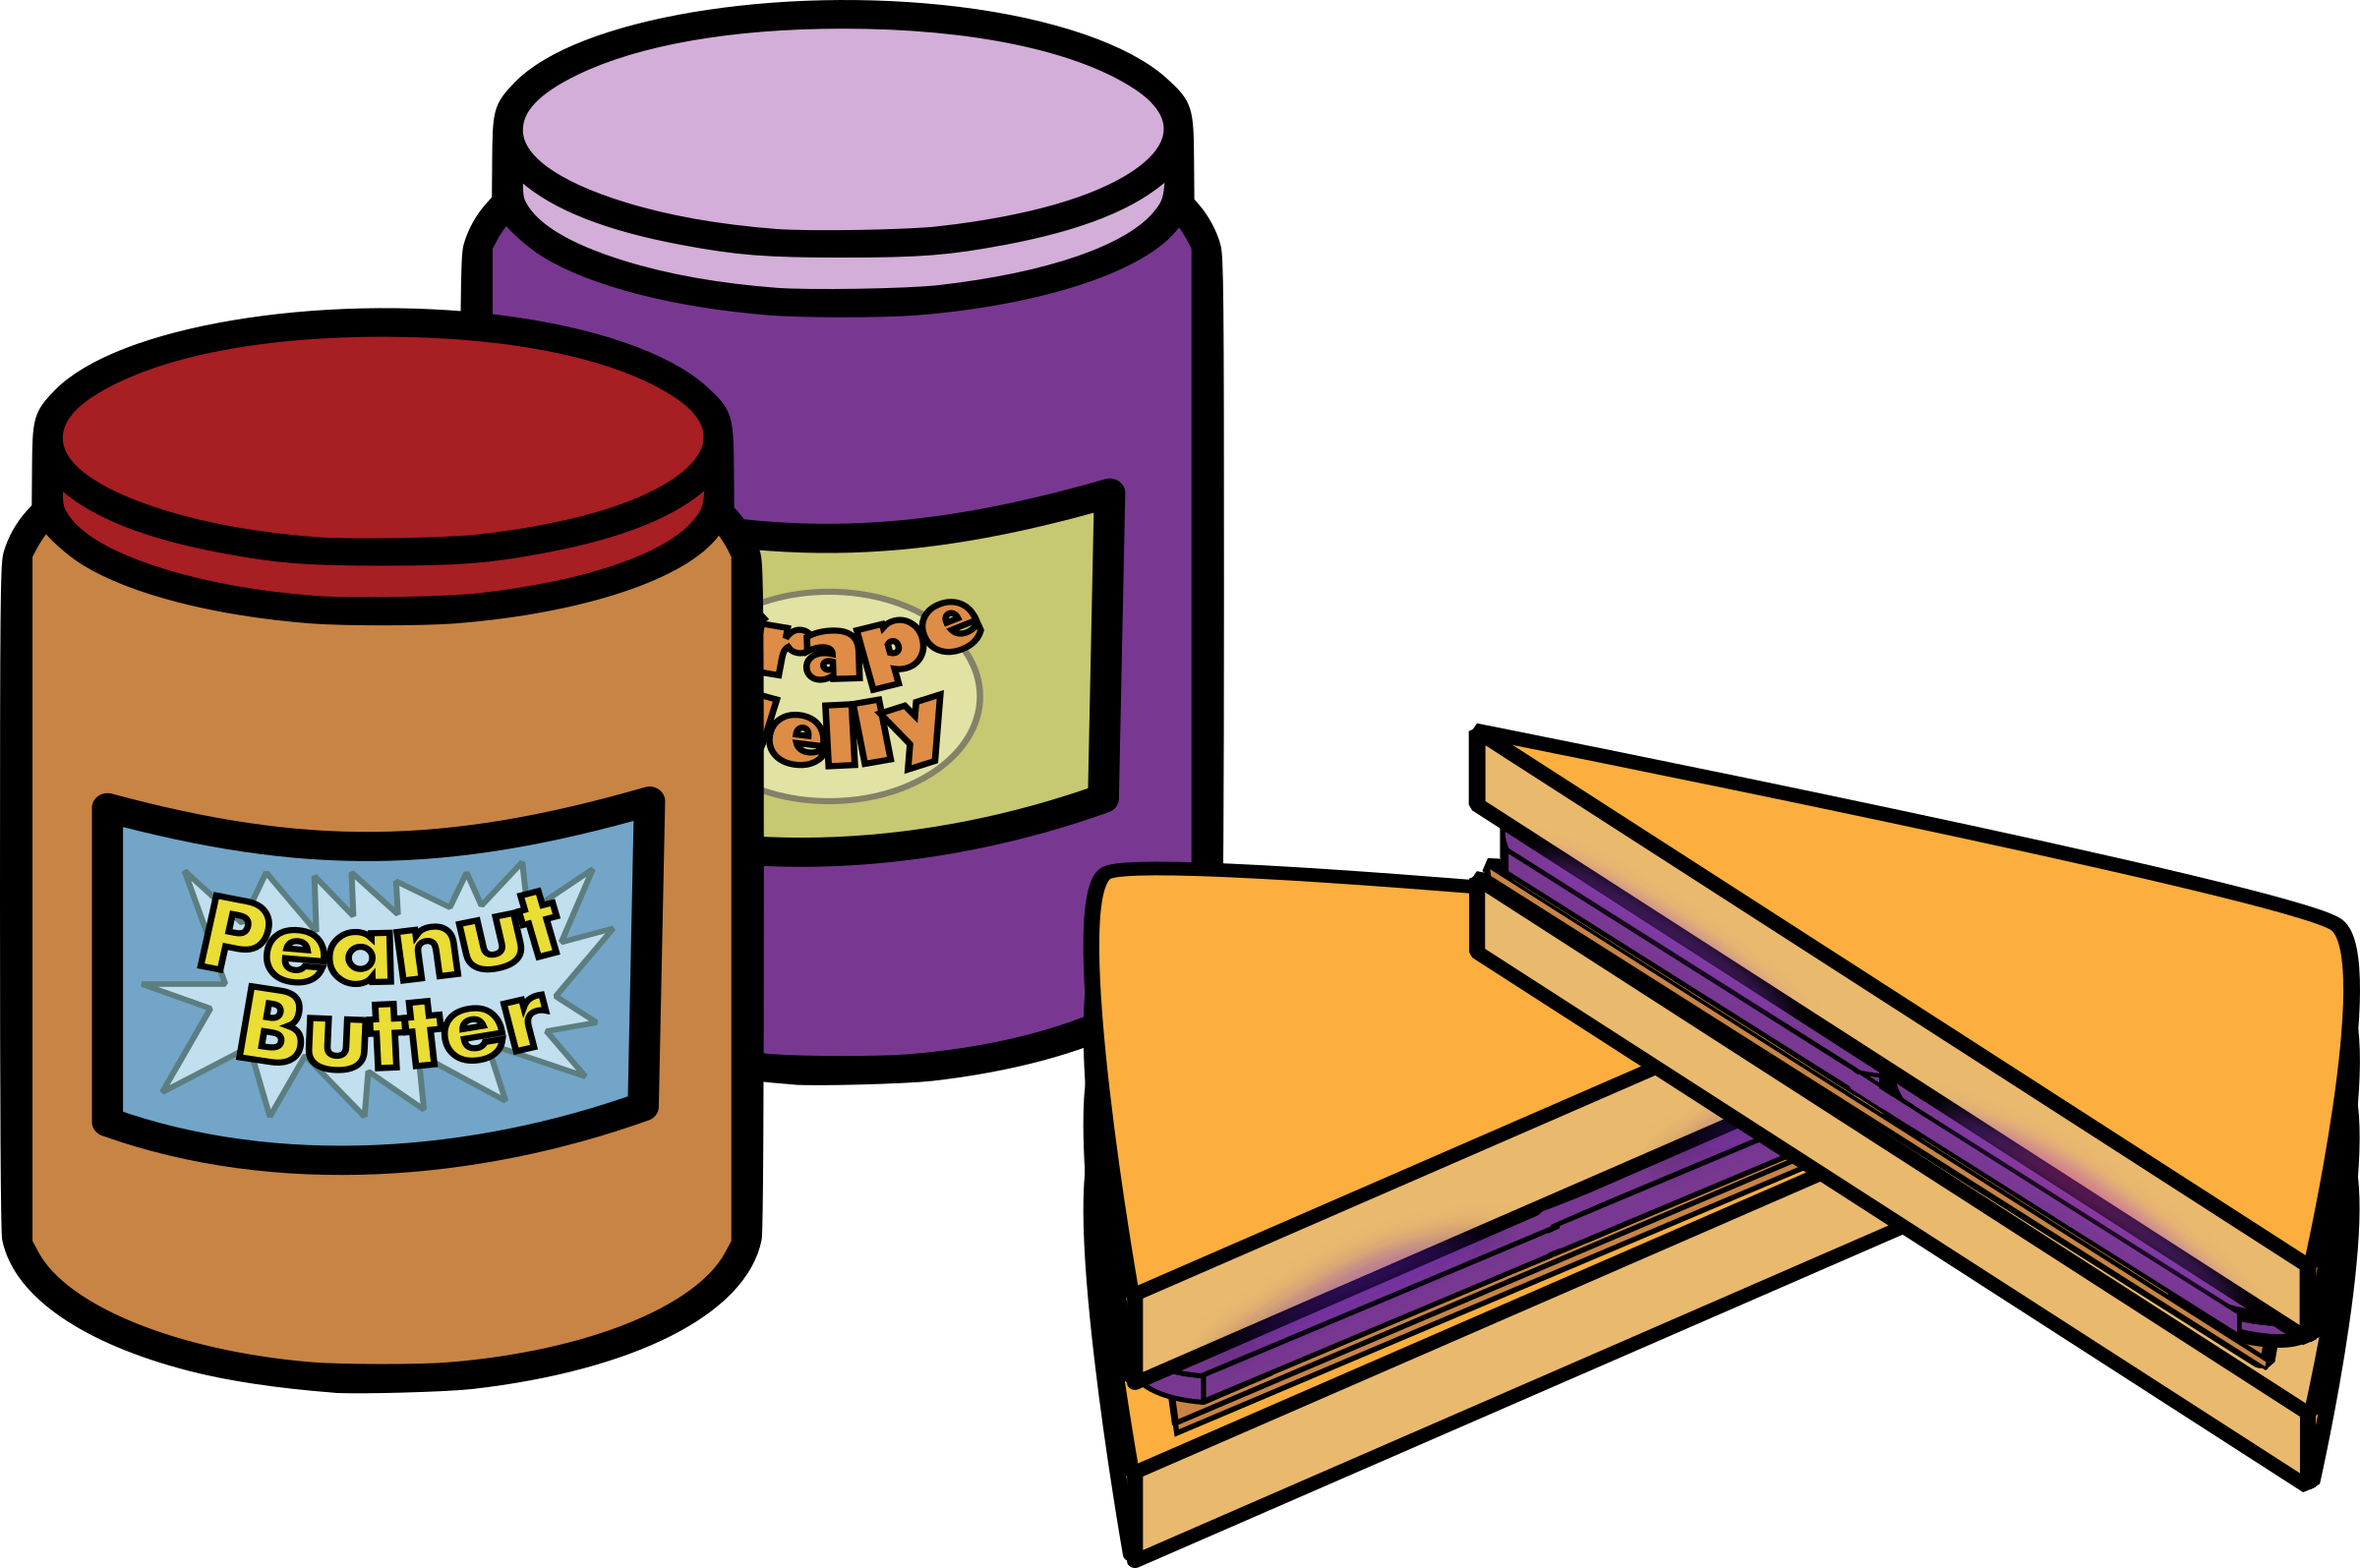 clipart about Big Image - Peanut Butter And Jelly Sandwich, Find more high ...